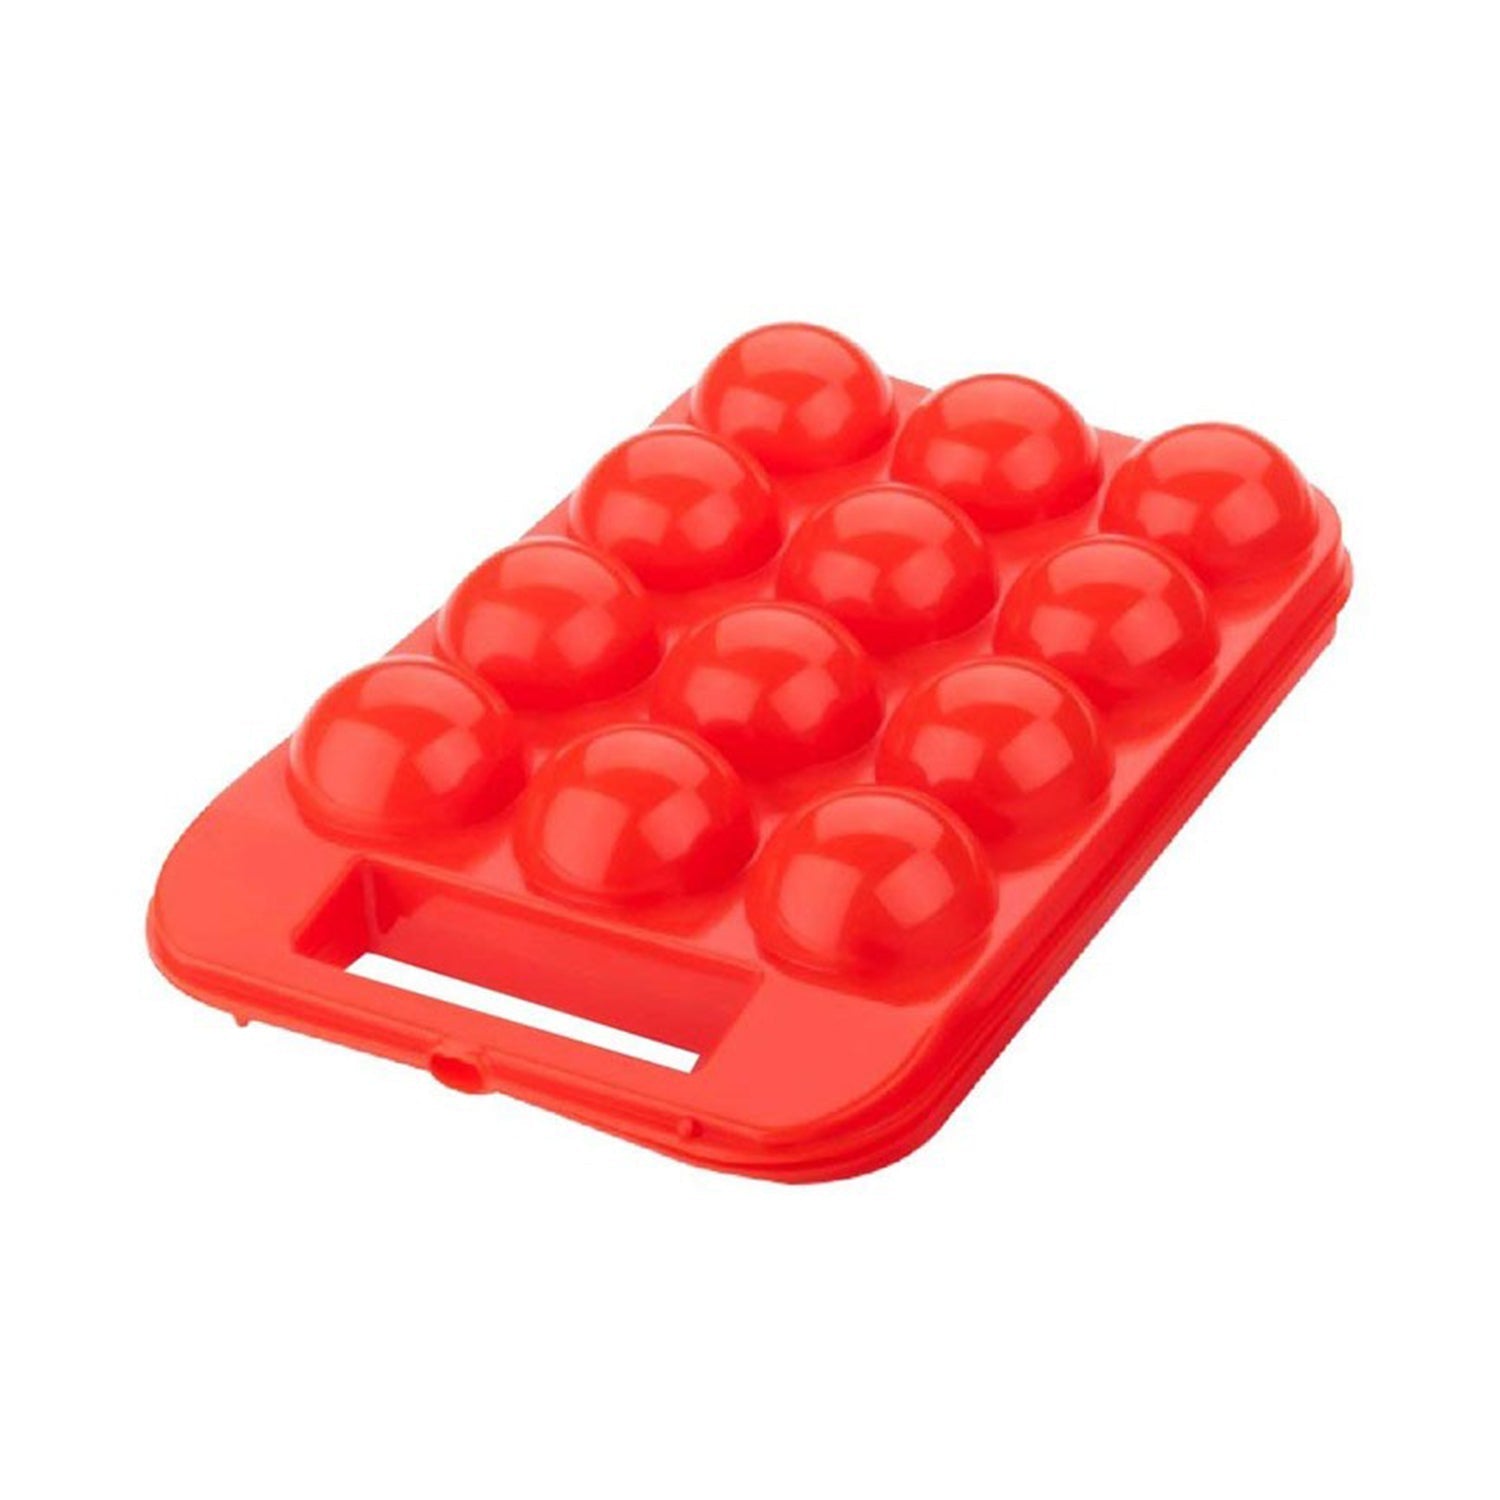 2171A Plastic Egg Carry Tray Holder Carrier Storage Box (12Cavity)